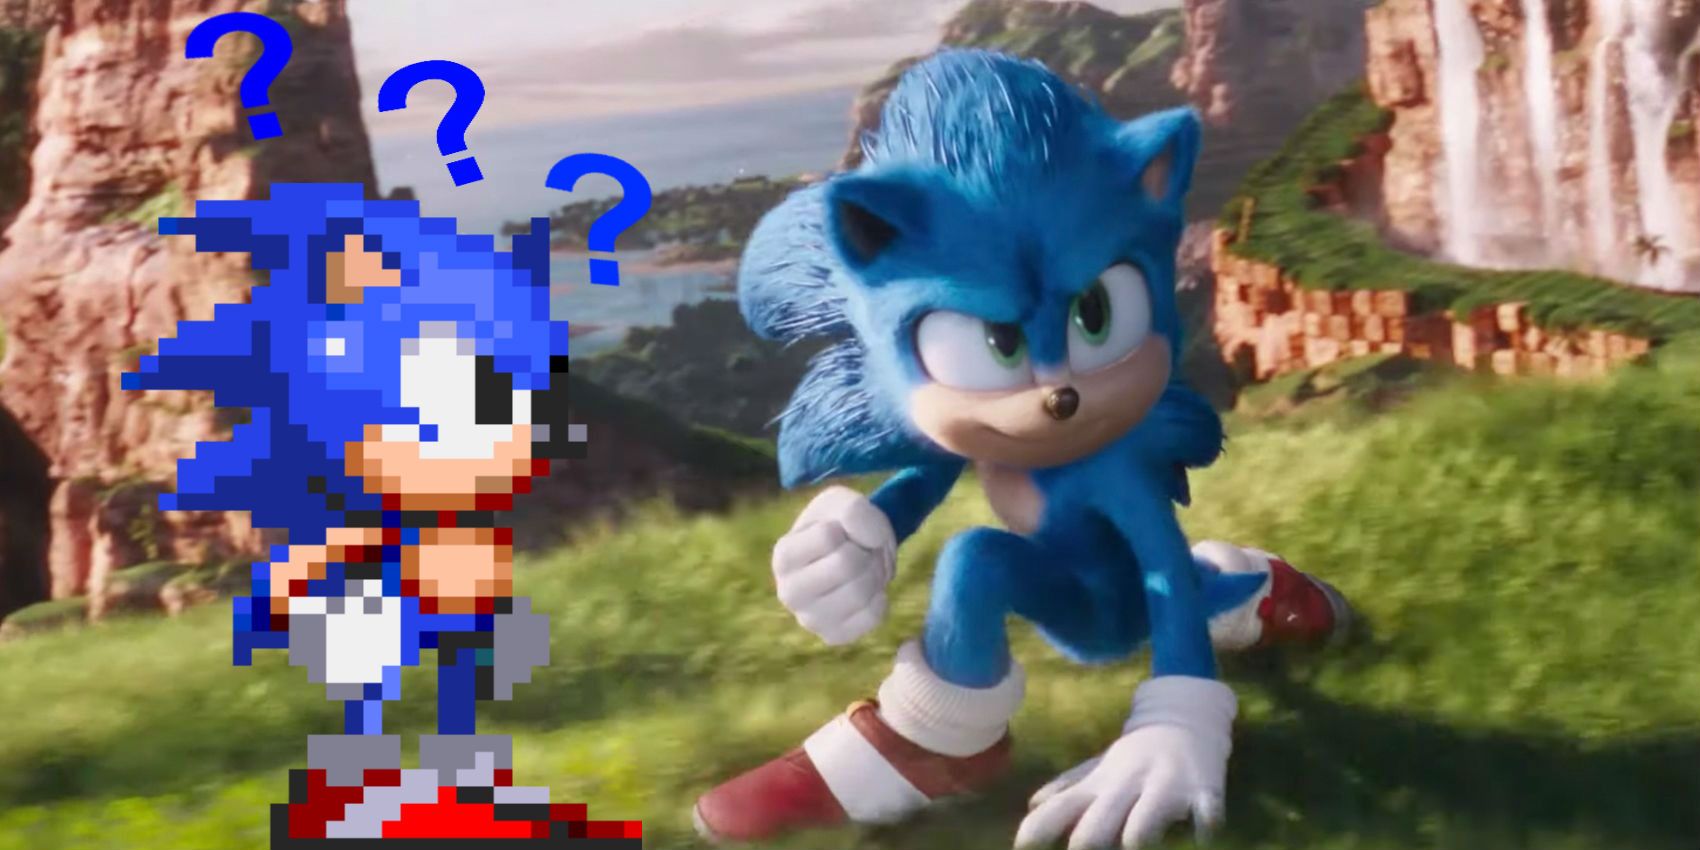 James Marsden to Race through the Green Hill Zone in 'Sonic the Hedgehog